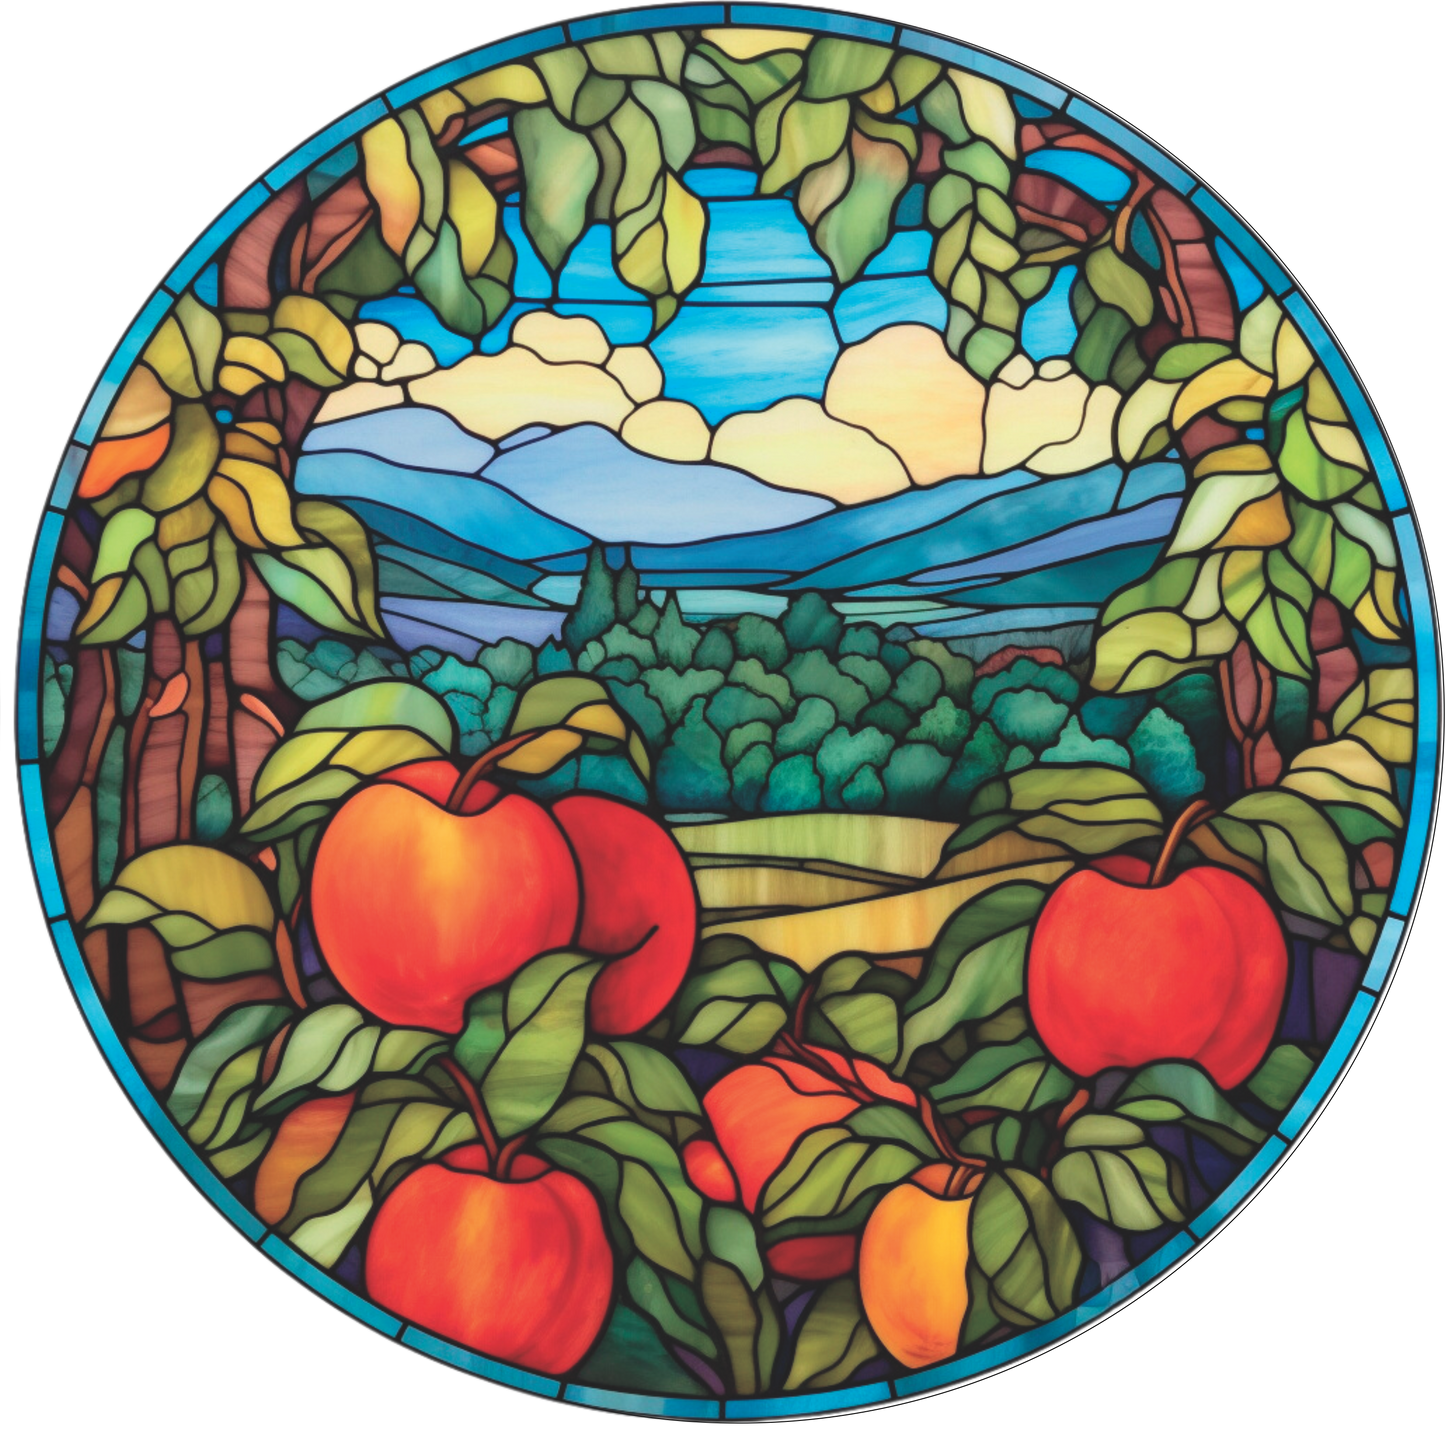 Apple blue skies Faux Stained Glass Wreath Sign Round